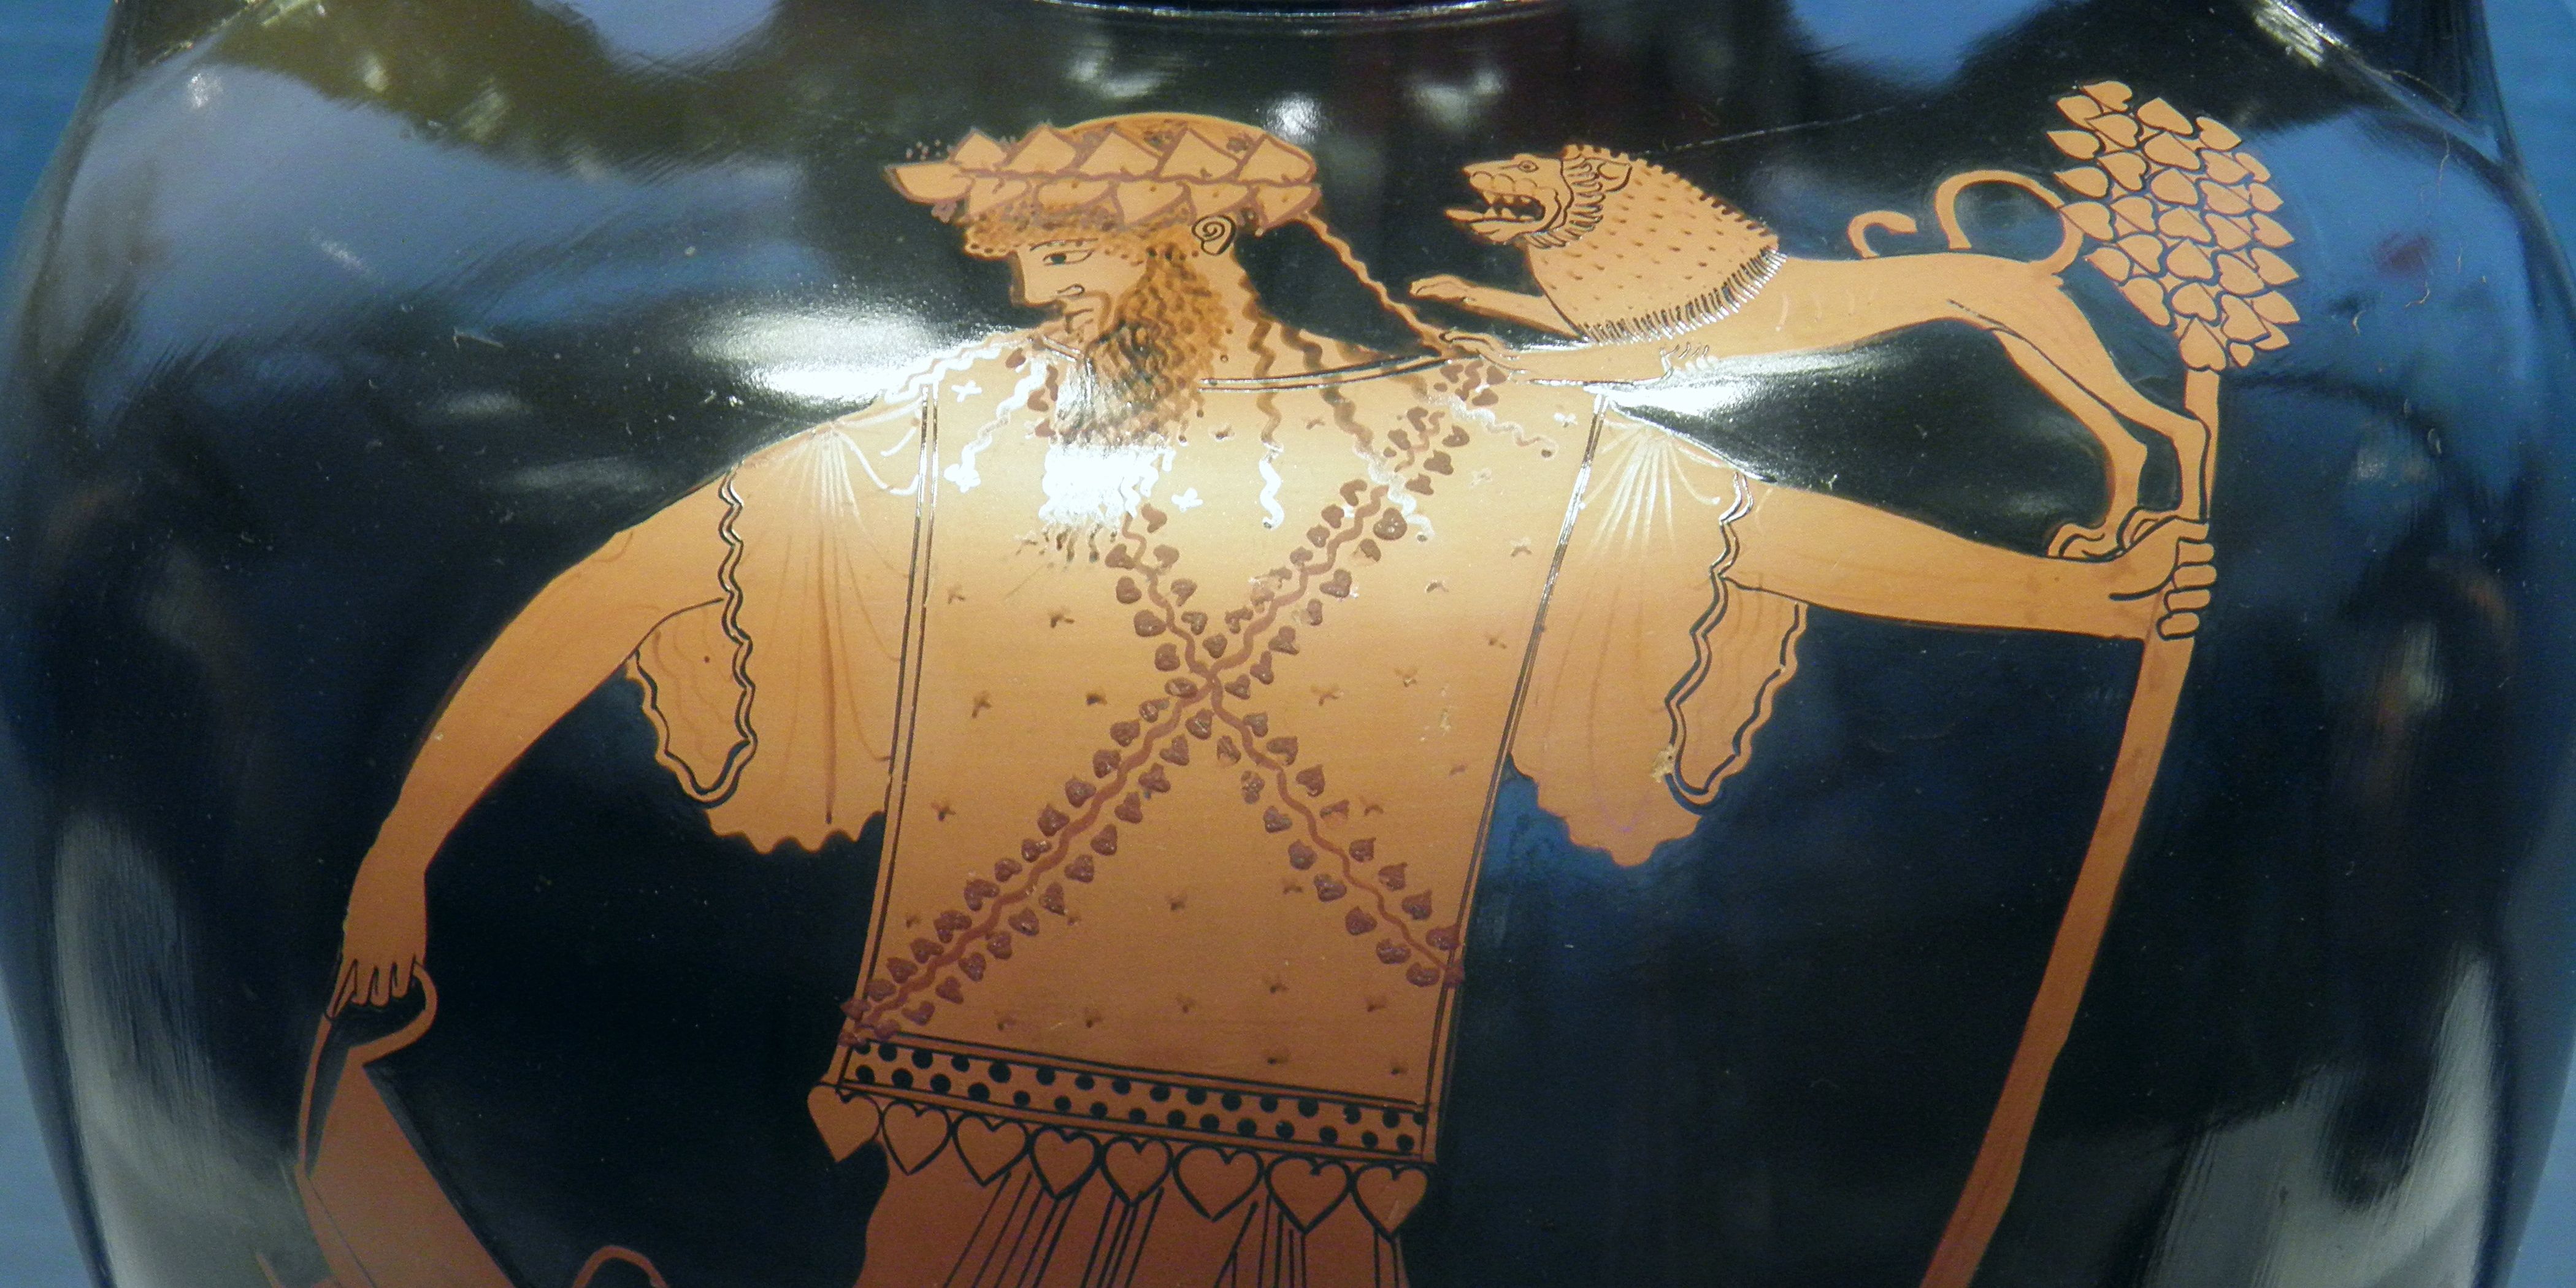 Dionysus depicted with the Thyrsus, his scepter